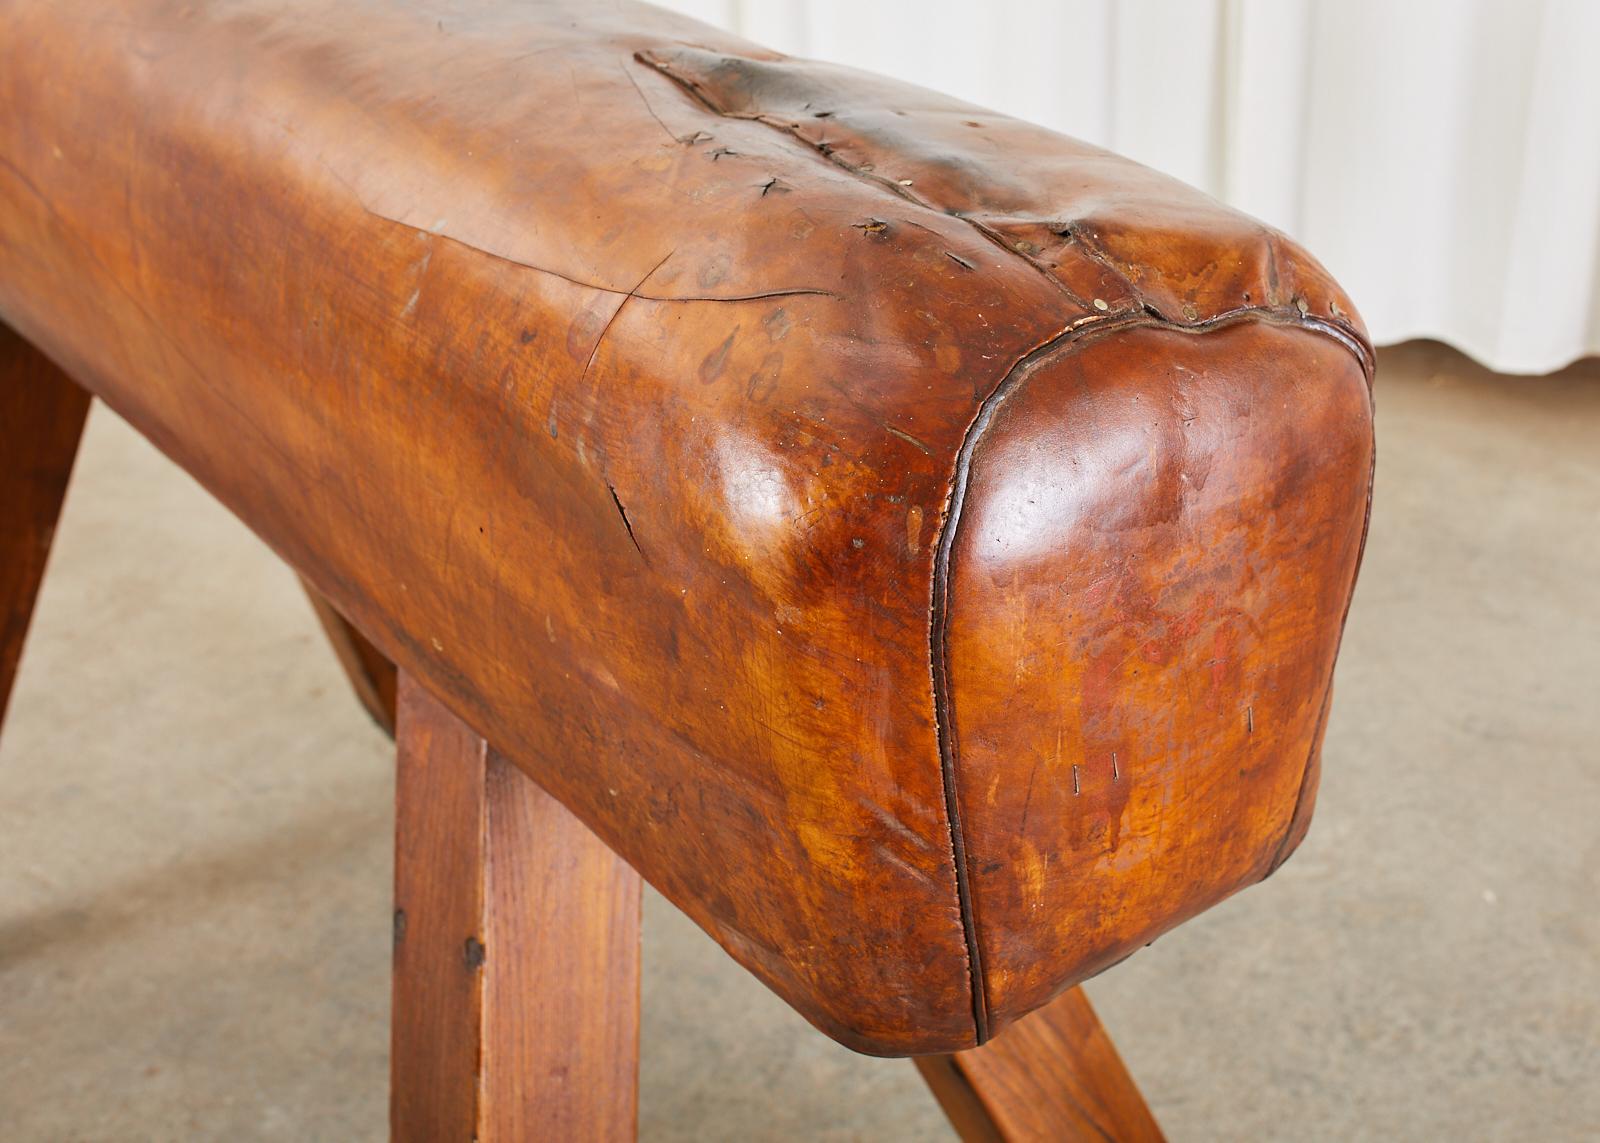 Hand-Crafted 19th Century English Oak Leather Gymnastic Pommel Horse